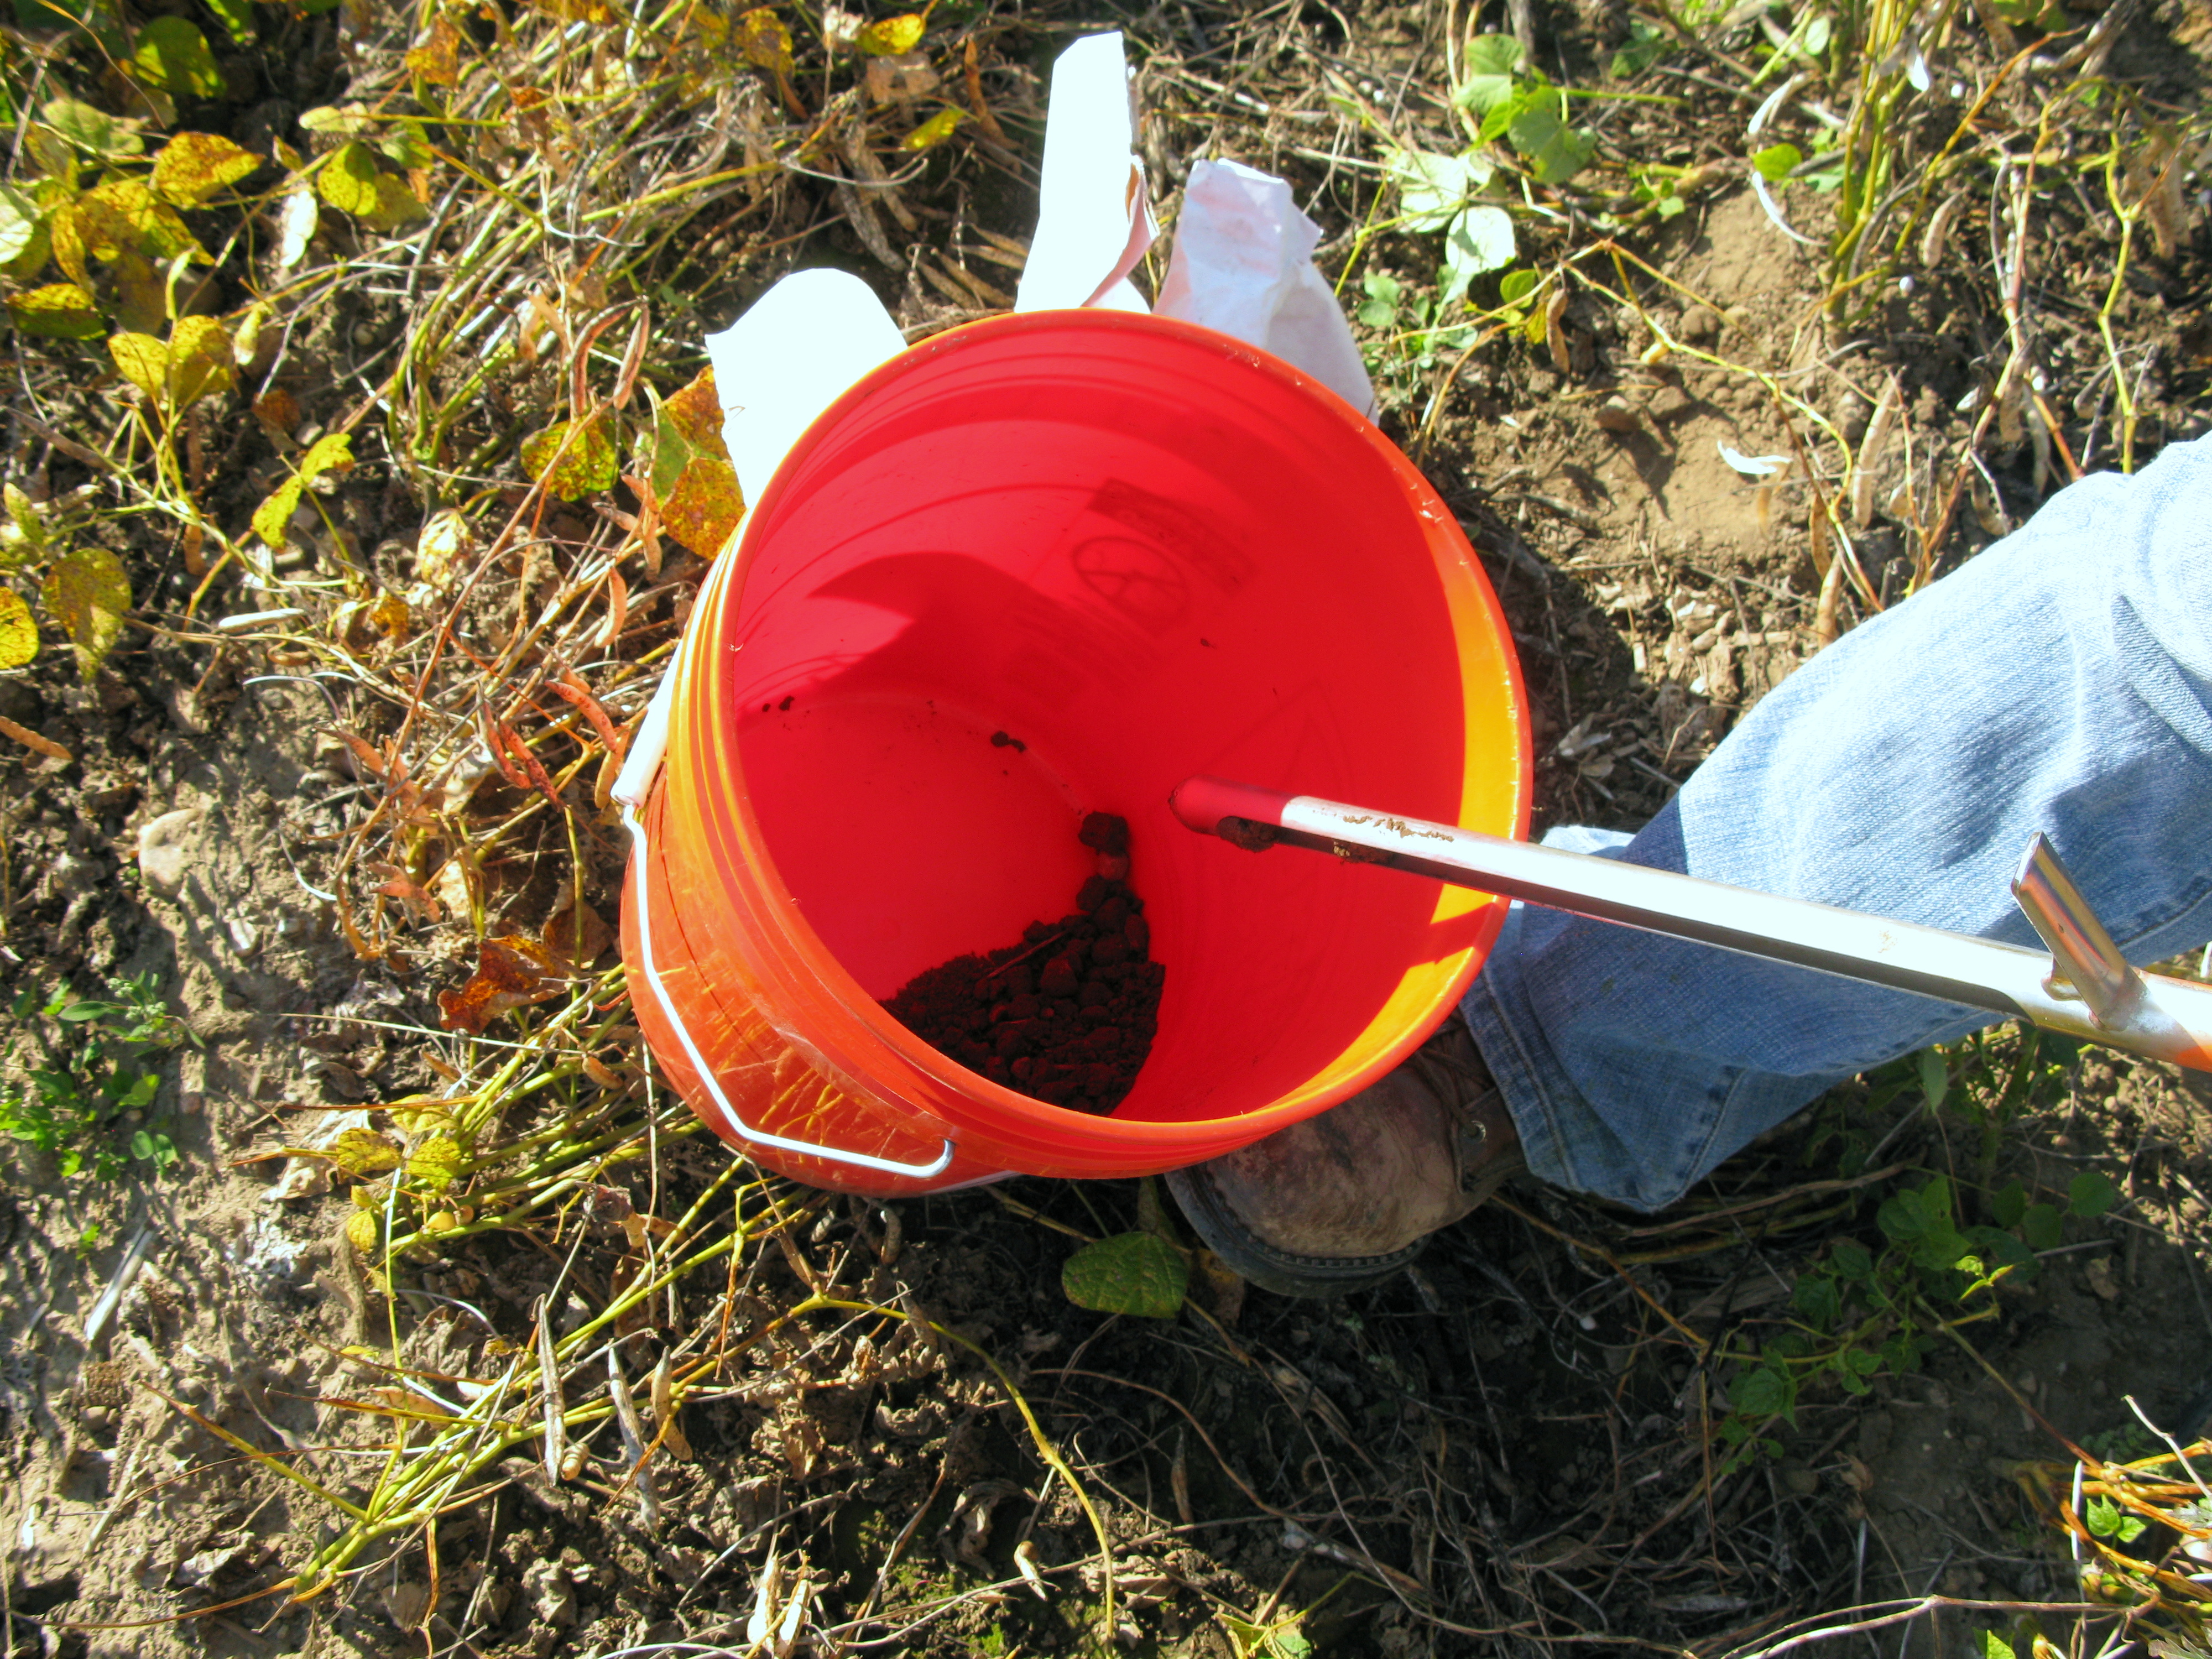 Soil subsamples collected into an orange bucket.